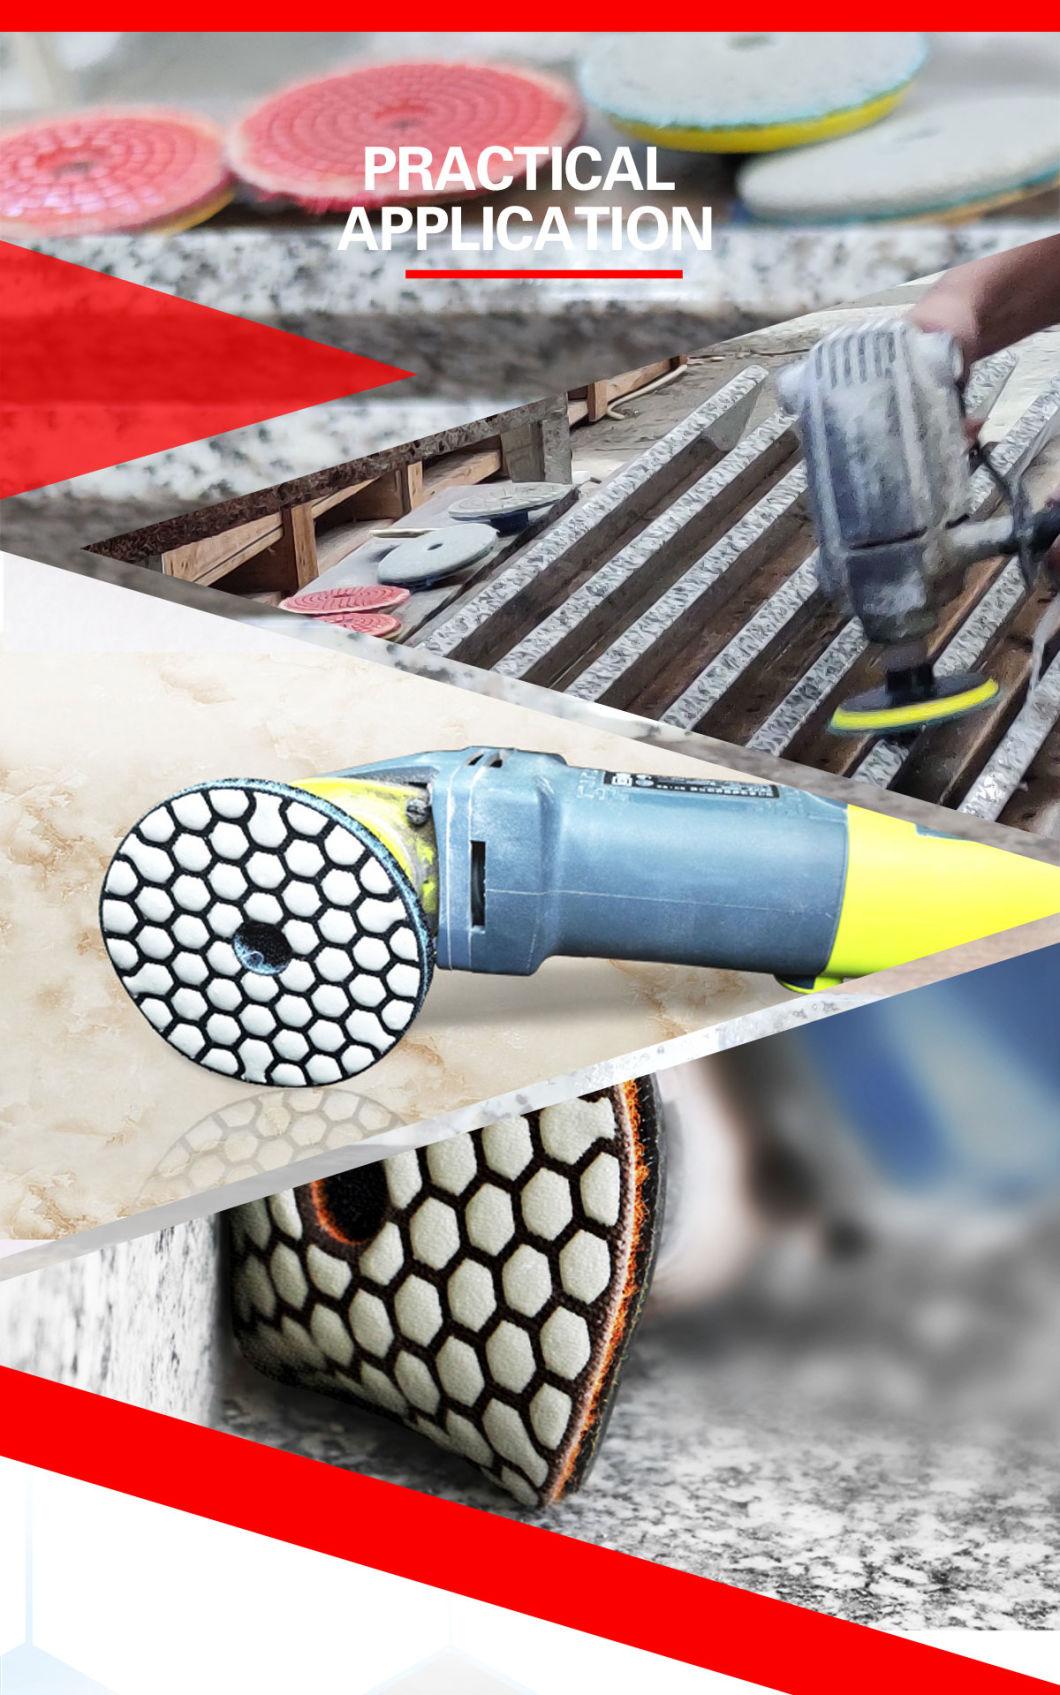 6" Environmental Protection Diamond Grinding Tools for Concrete